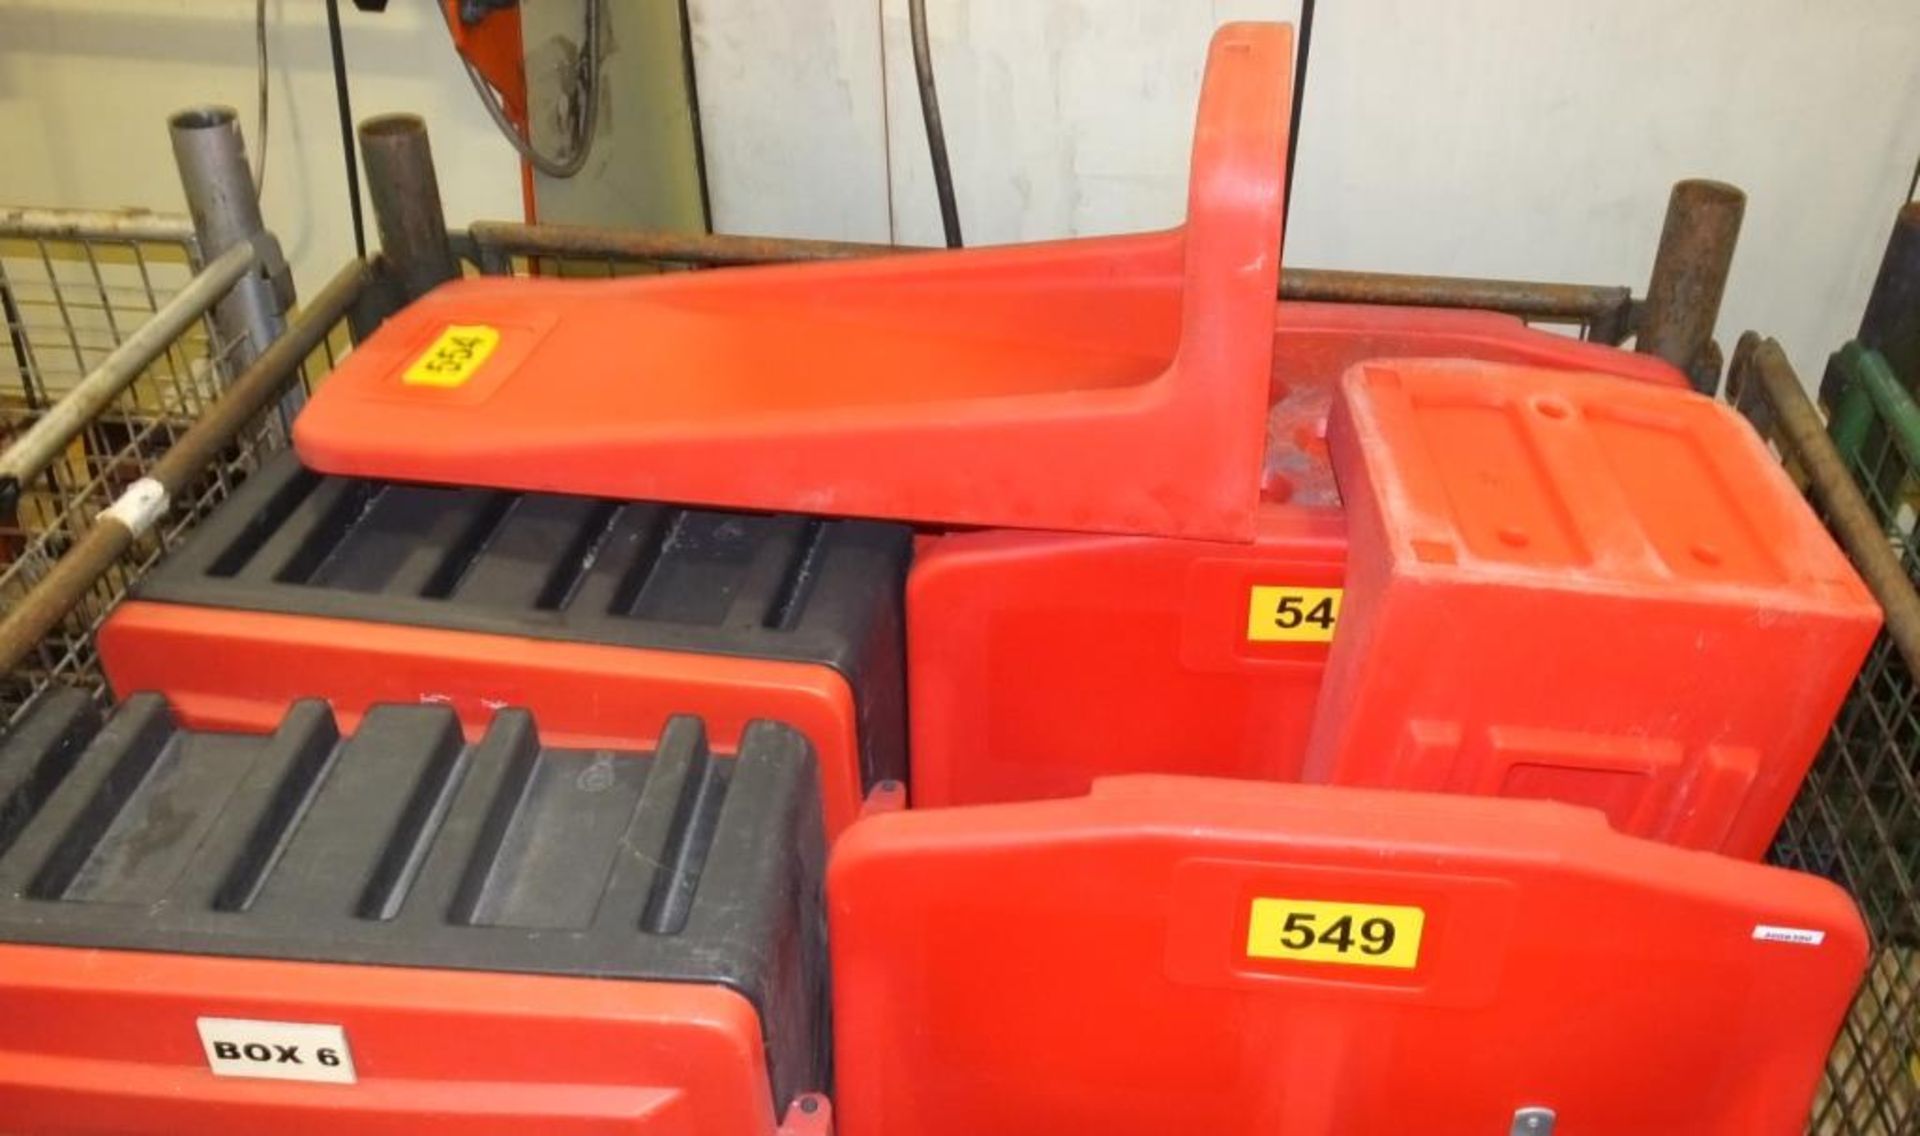 Plastic Fire Extinguisher Cabinets and Stands - Image 2 of 2